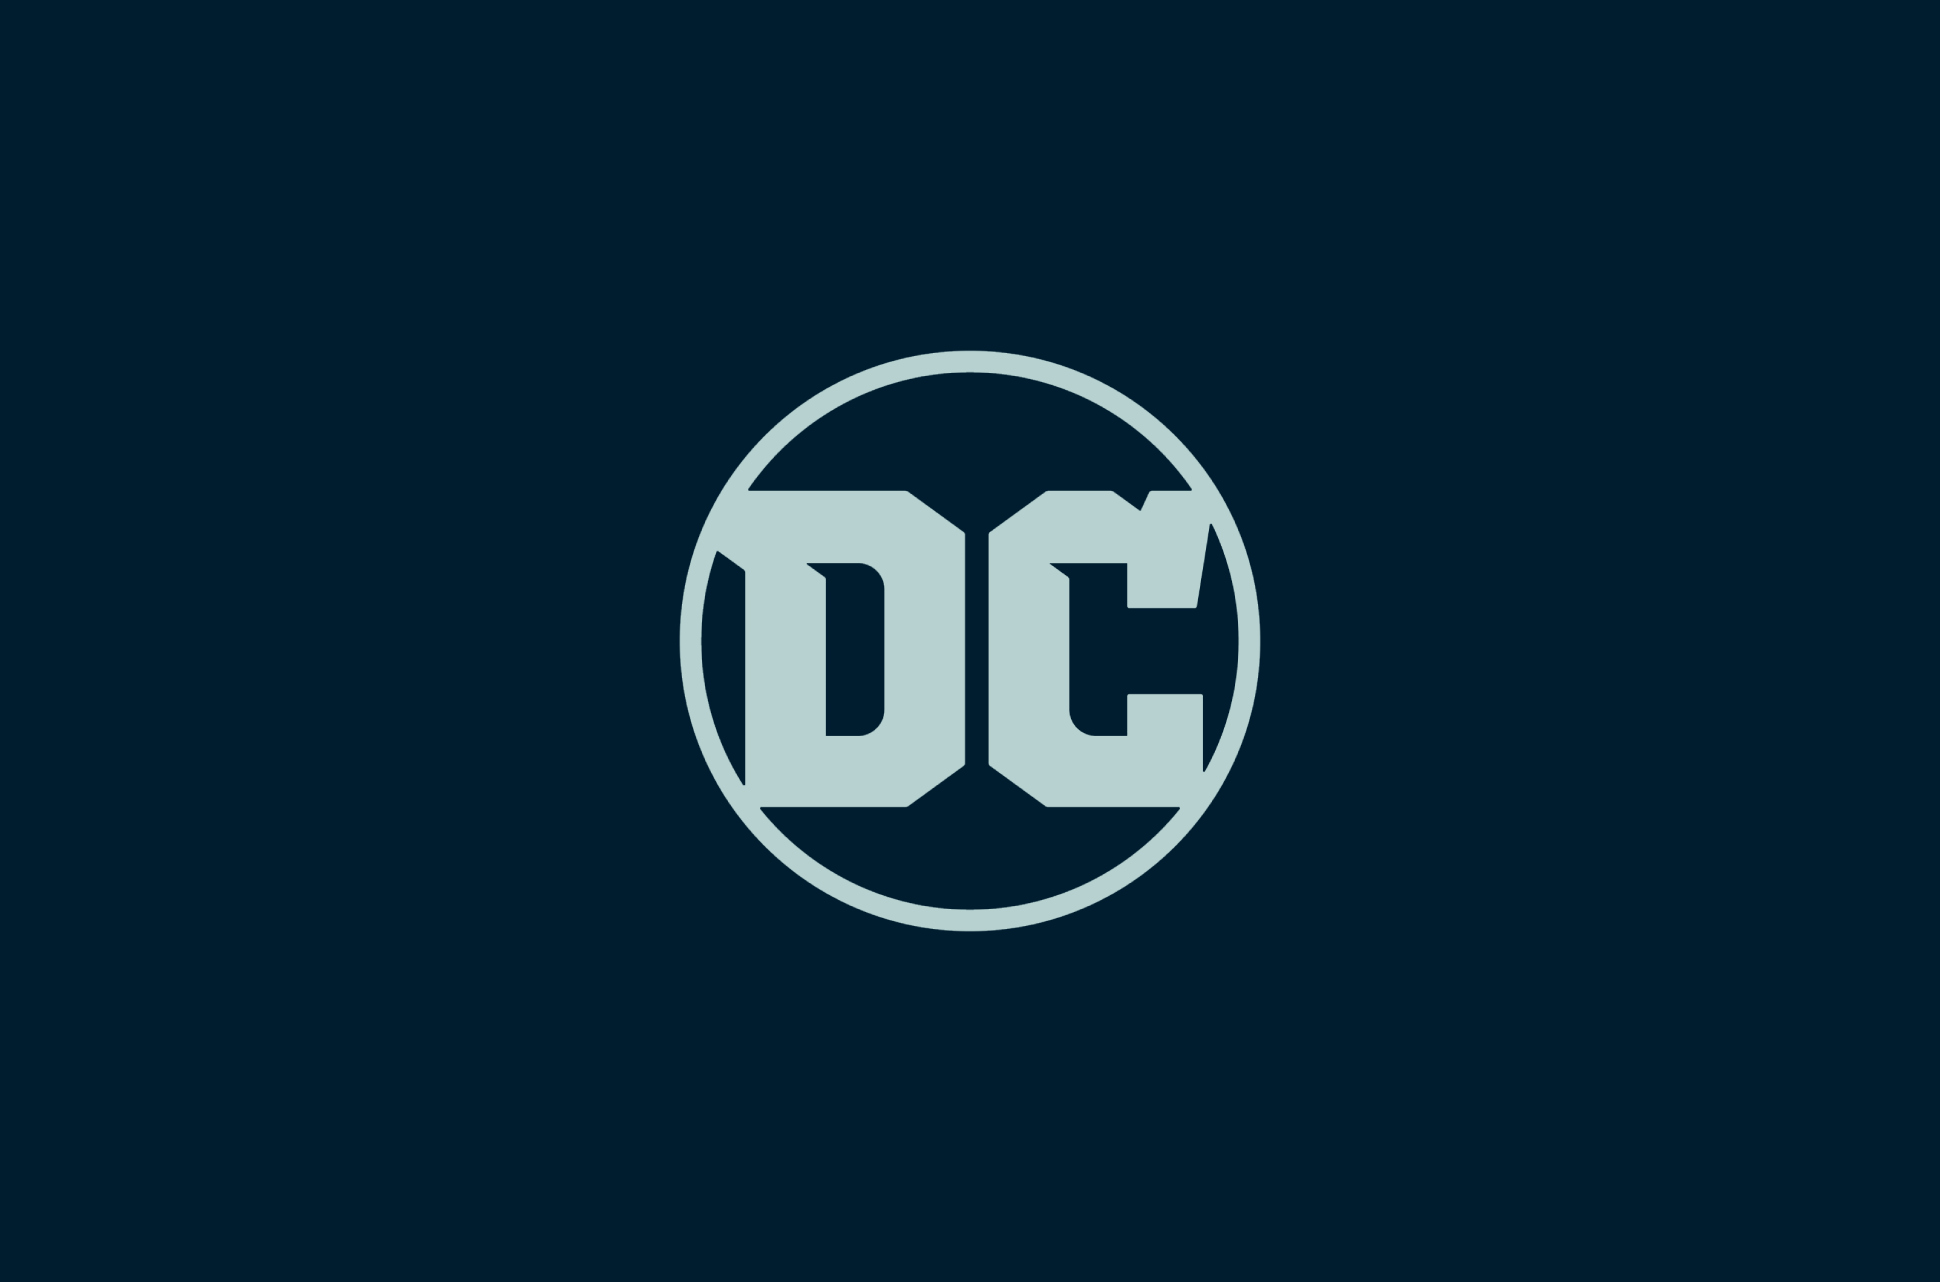 Guide: DC Comics Movies and DCEU